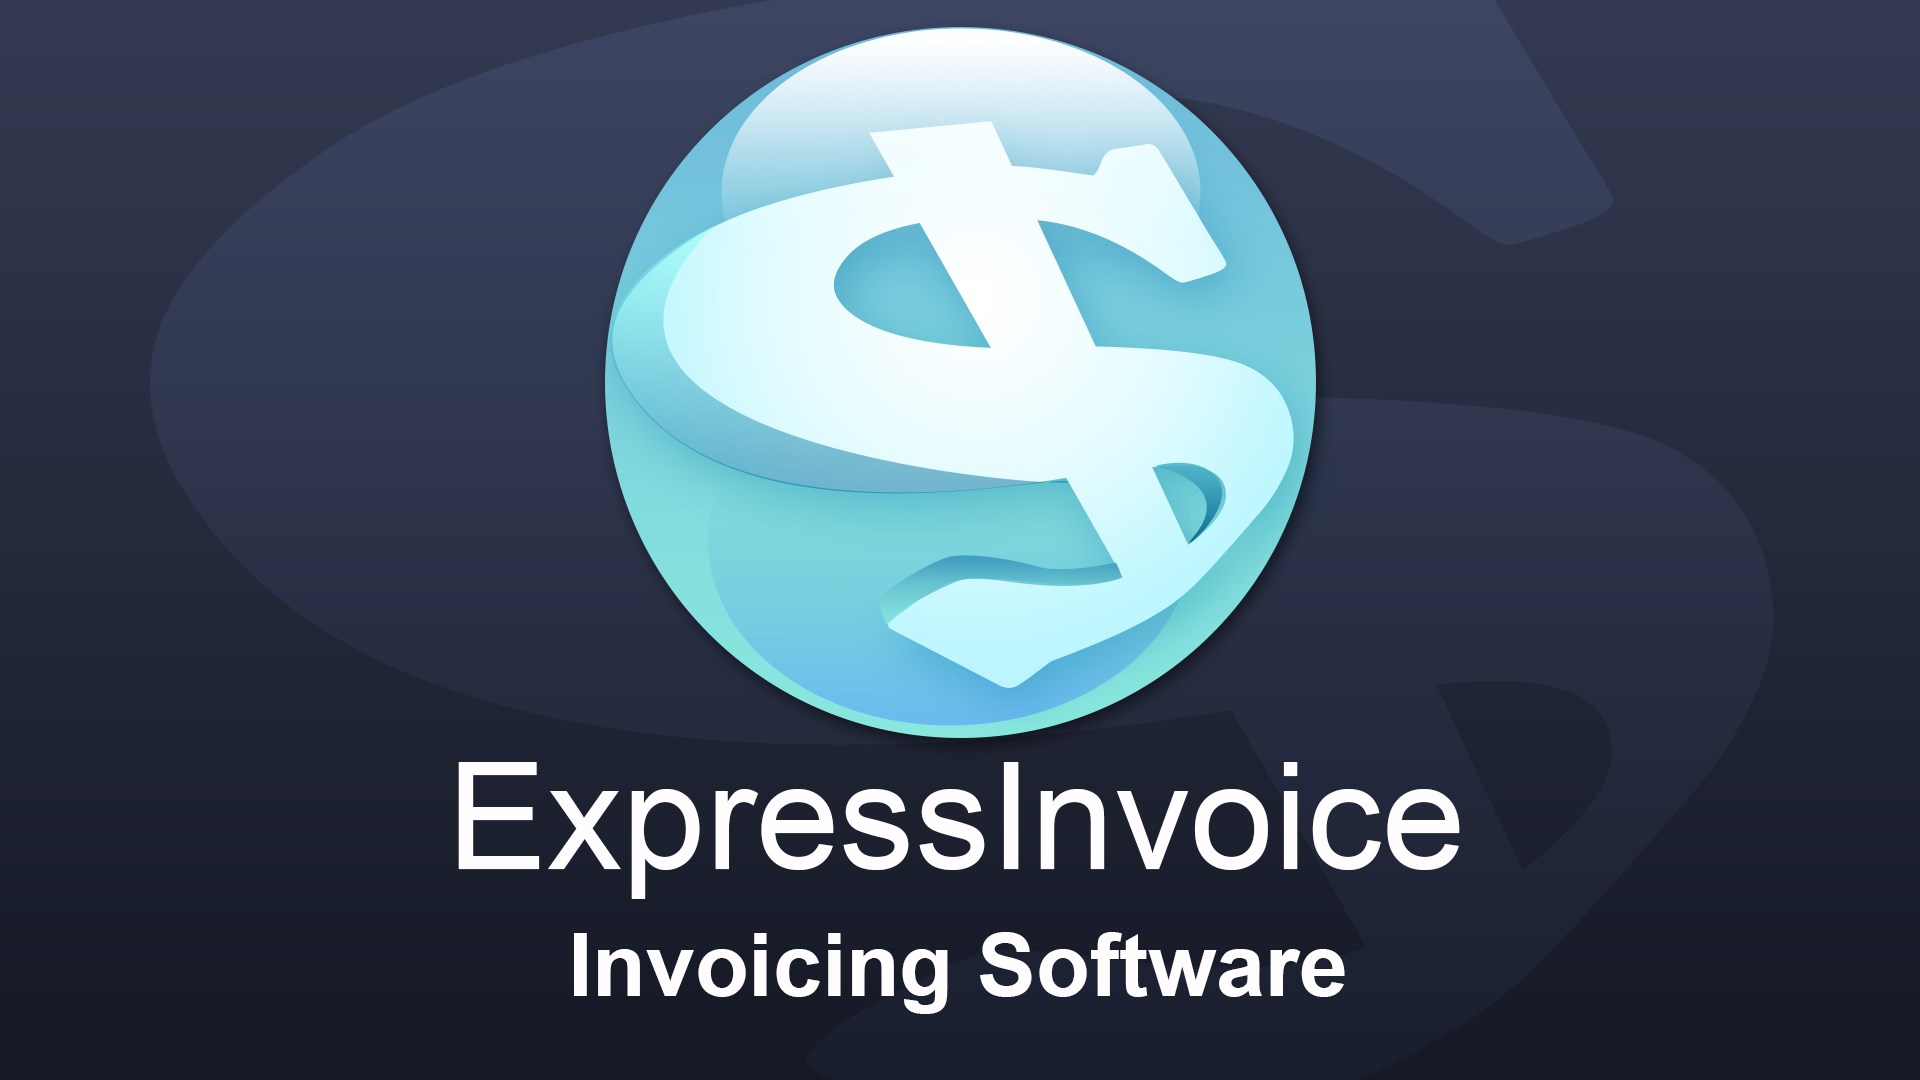 (203.62$) NCH: Express Invoice Invoicing Key